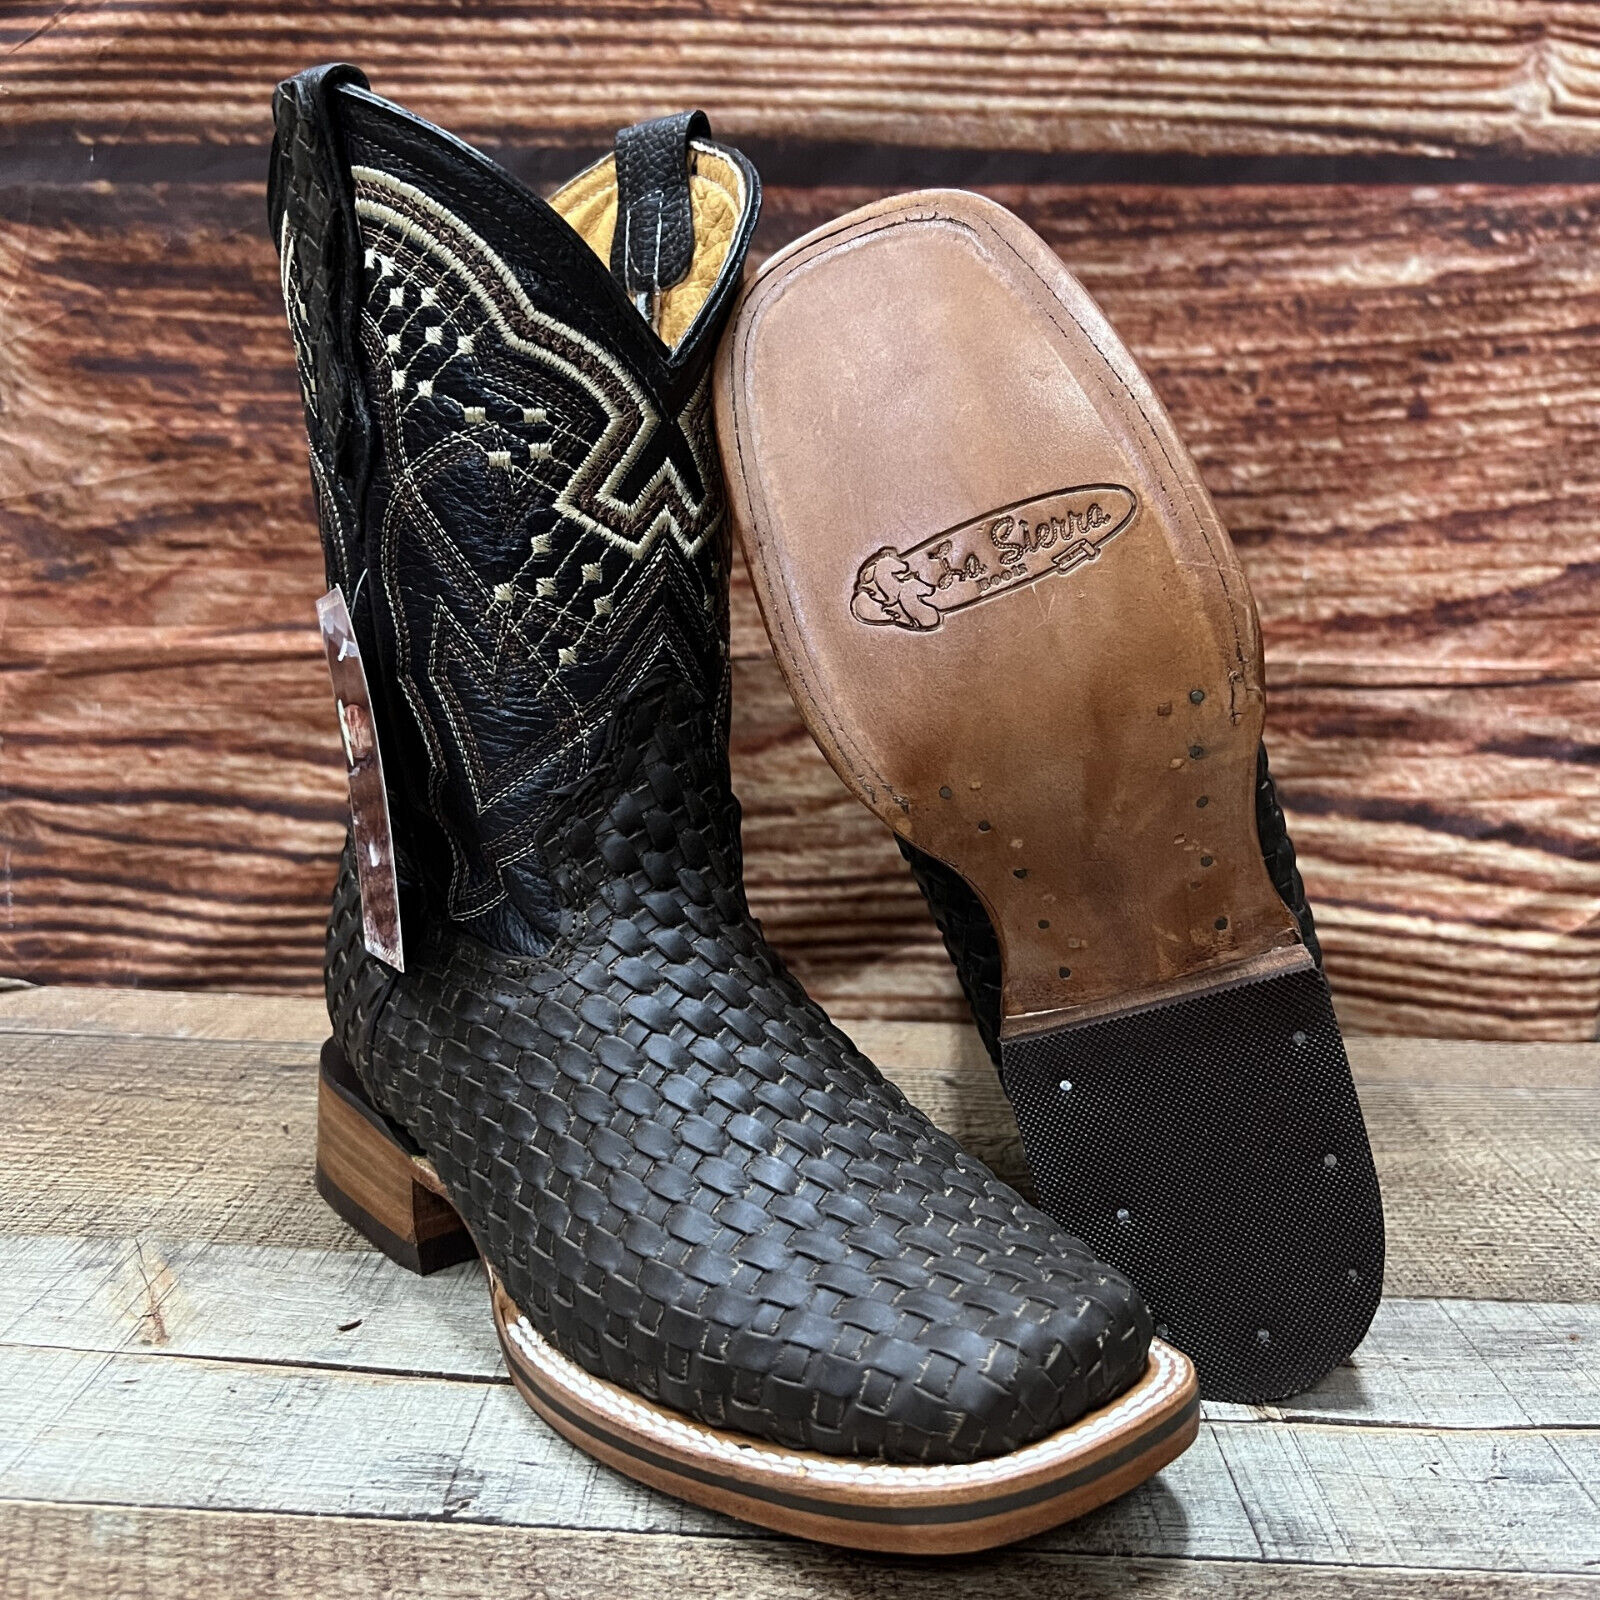 Rodeo Cowboy Boot for Men Hand-woven in Black and Brown Bota Tejida vaquera 692